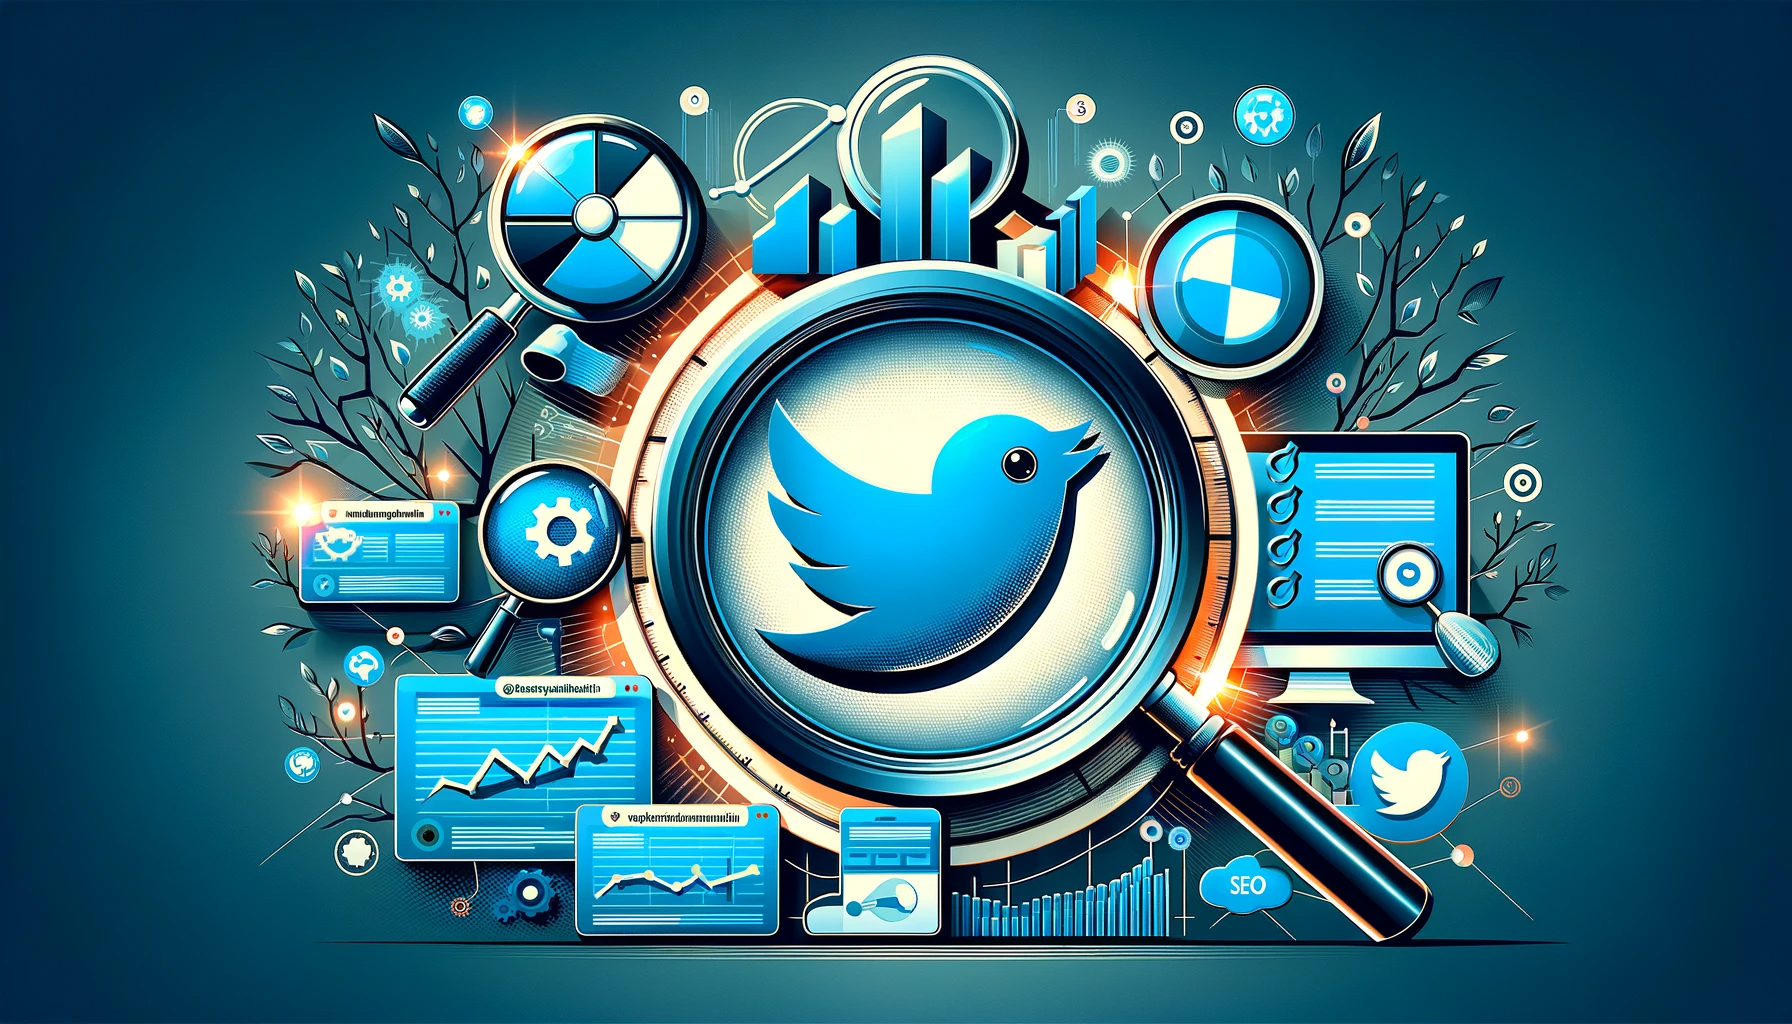 twitter-analytics-boosting-performance-with-rank-panel